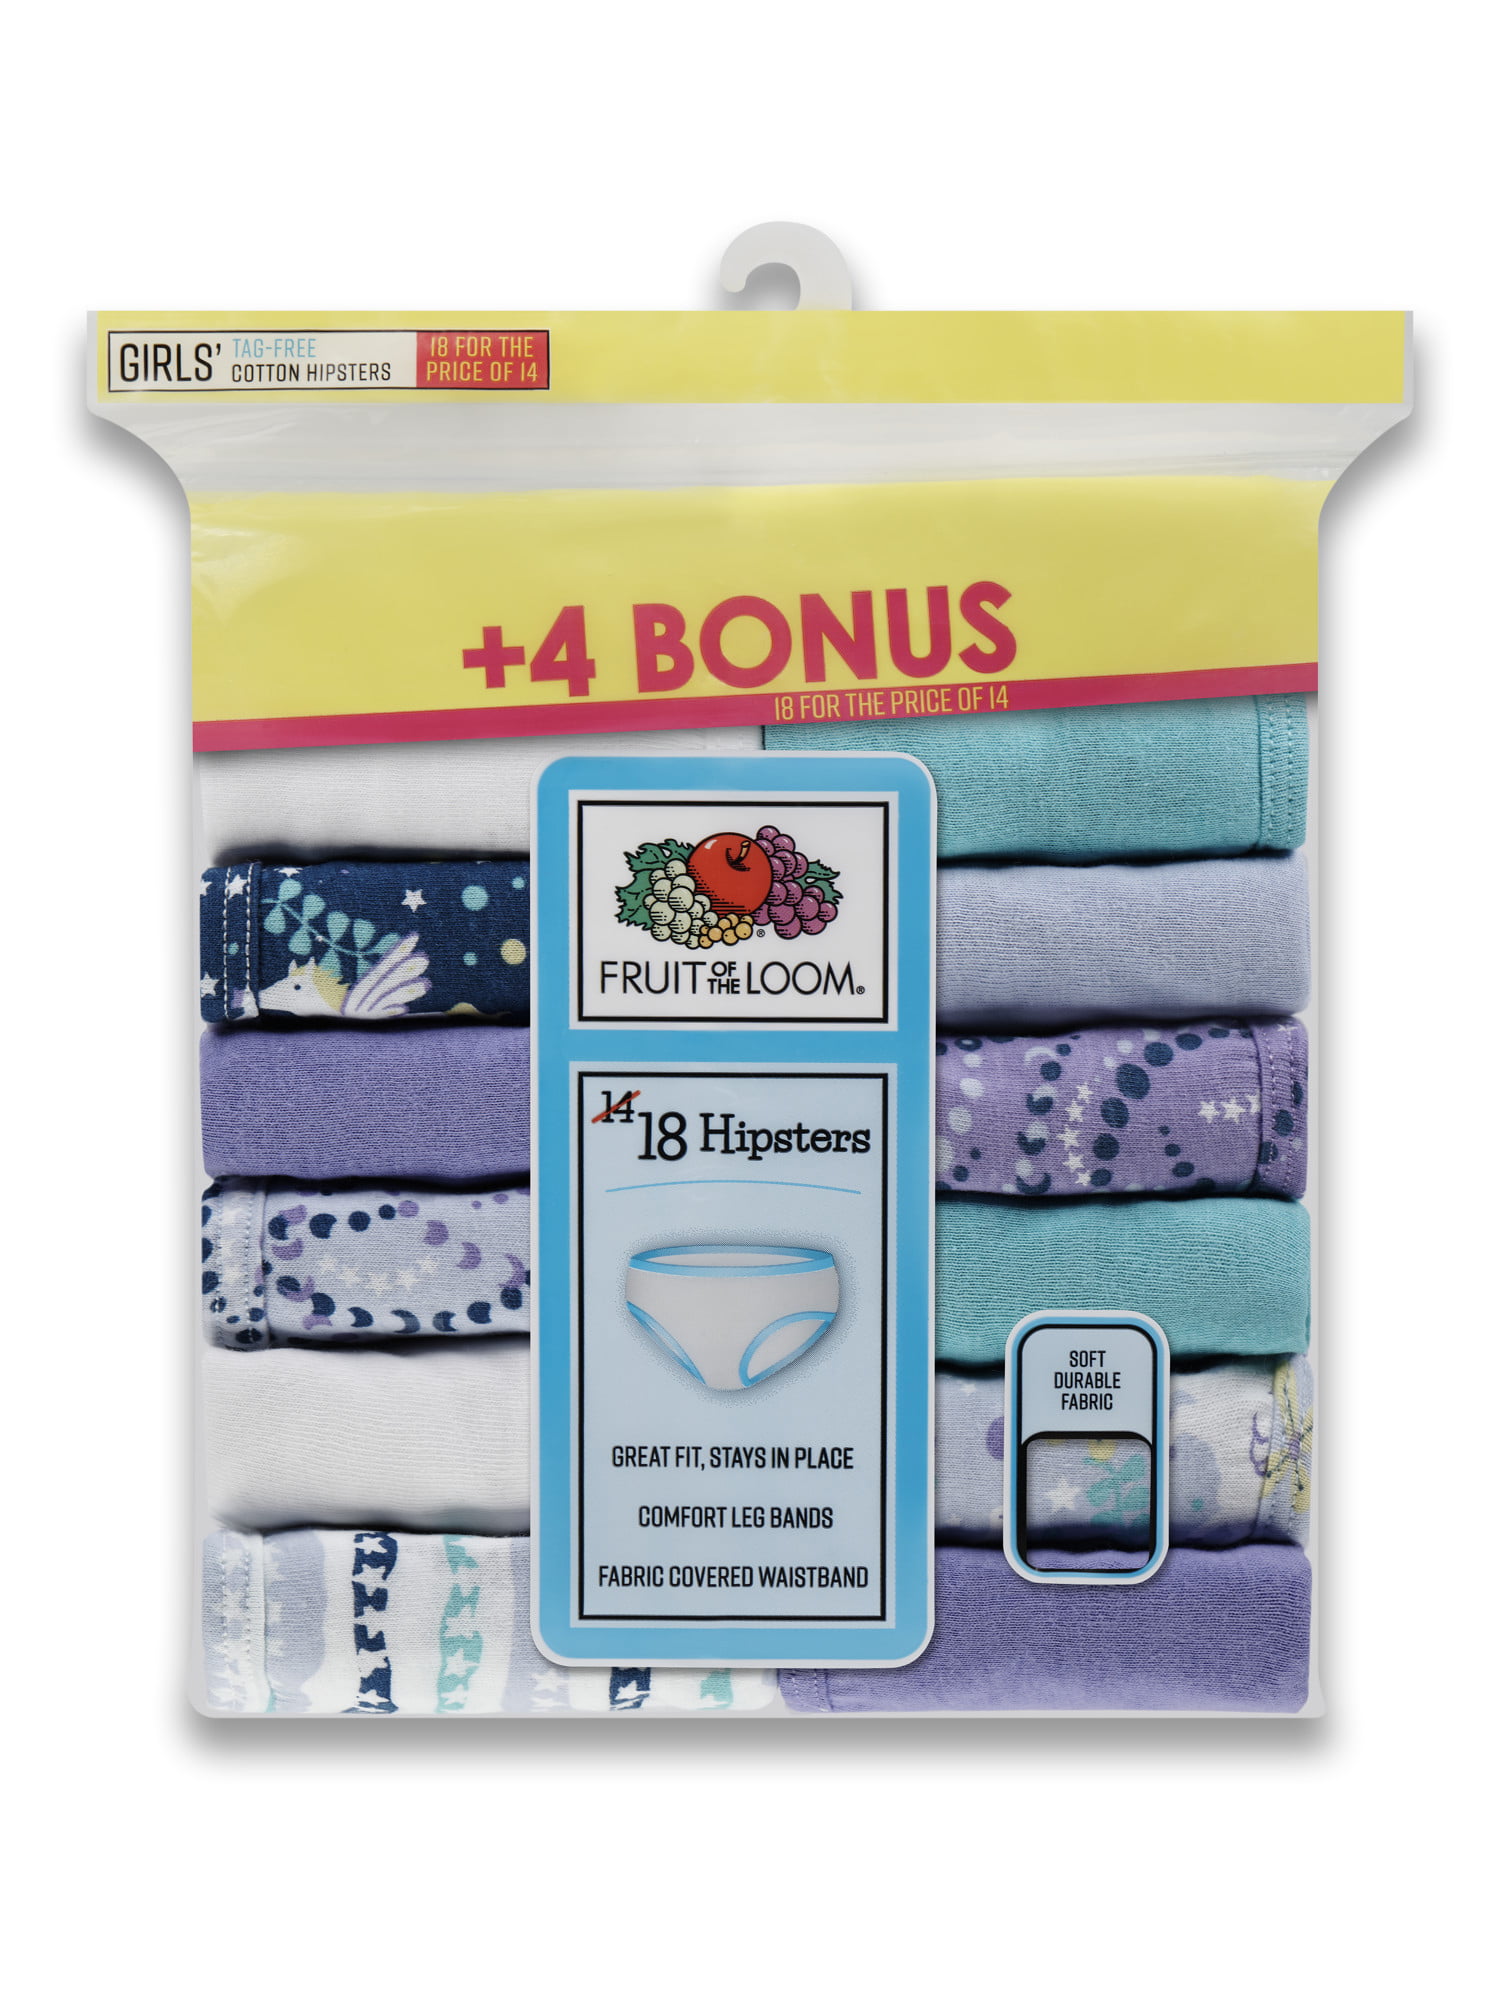 Fruit of the Loom Girls Underwear, Assorted Cotton Hipsters, 14+4 Bonus  Pack Sizes 4-14